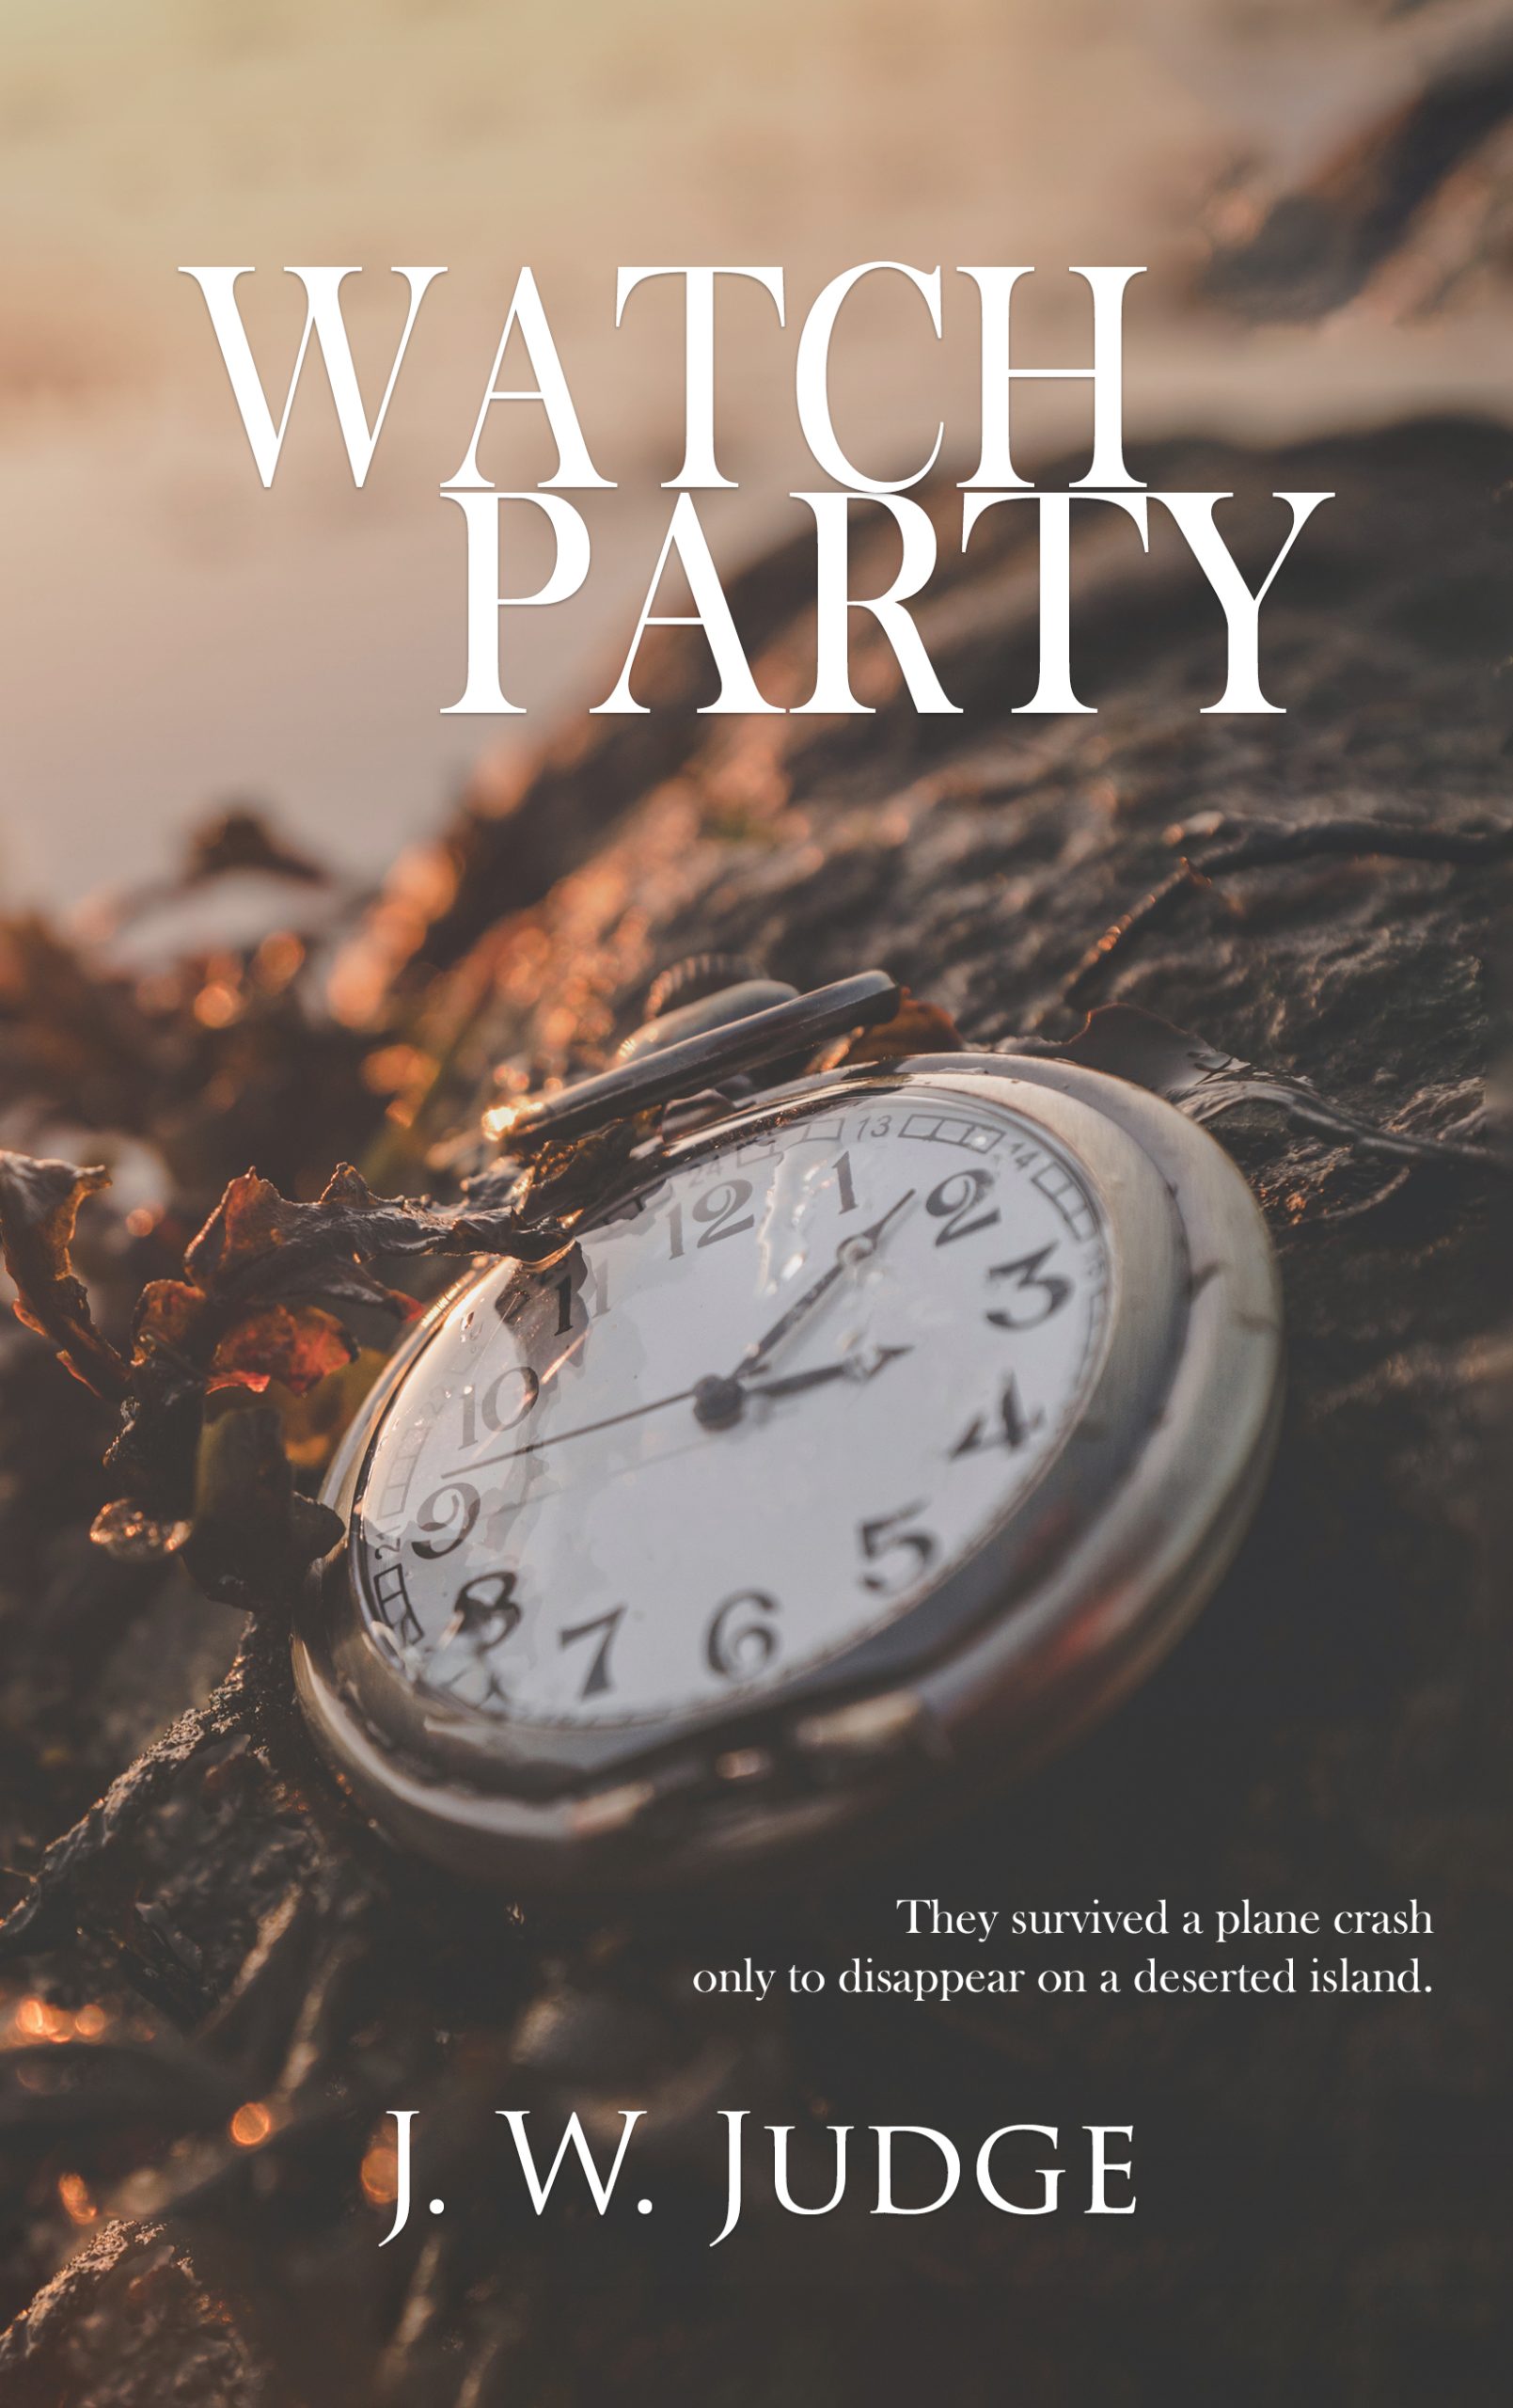 Watch Party by J. W. Judge